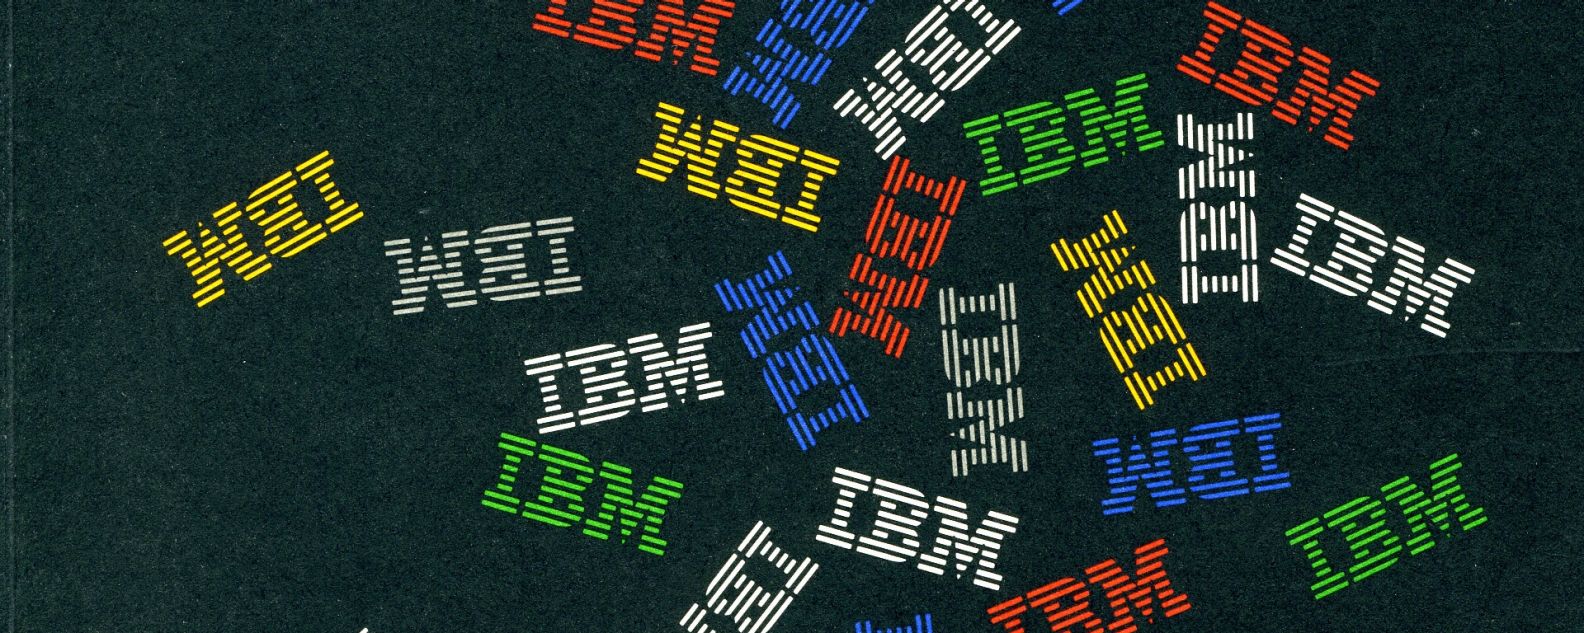 Multiples of the IBM 8-bar logo in various colors at various angles, against a black backdrop, design by Paul Rand